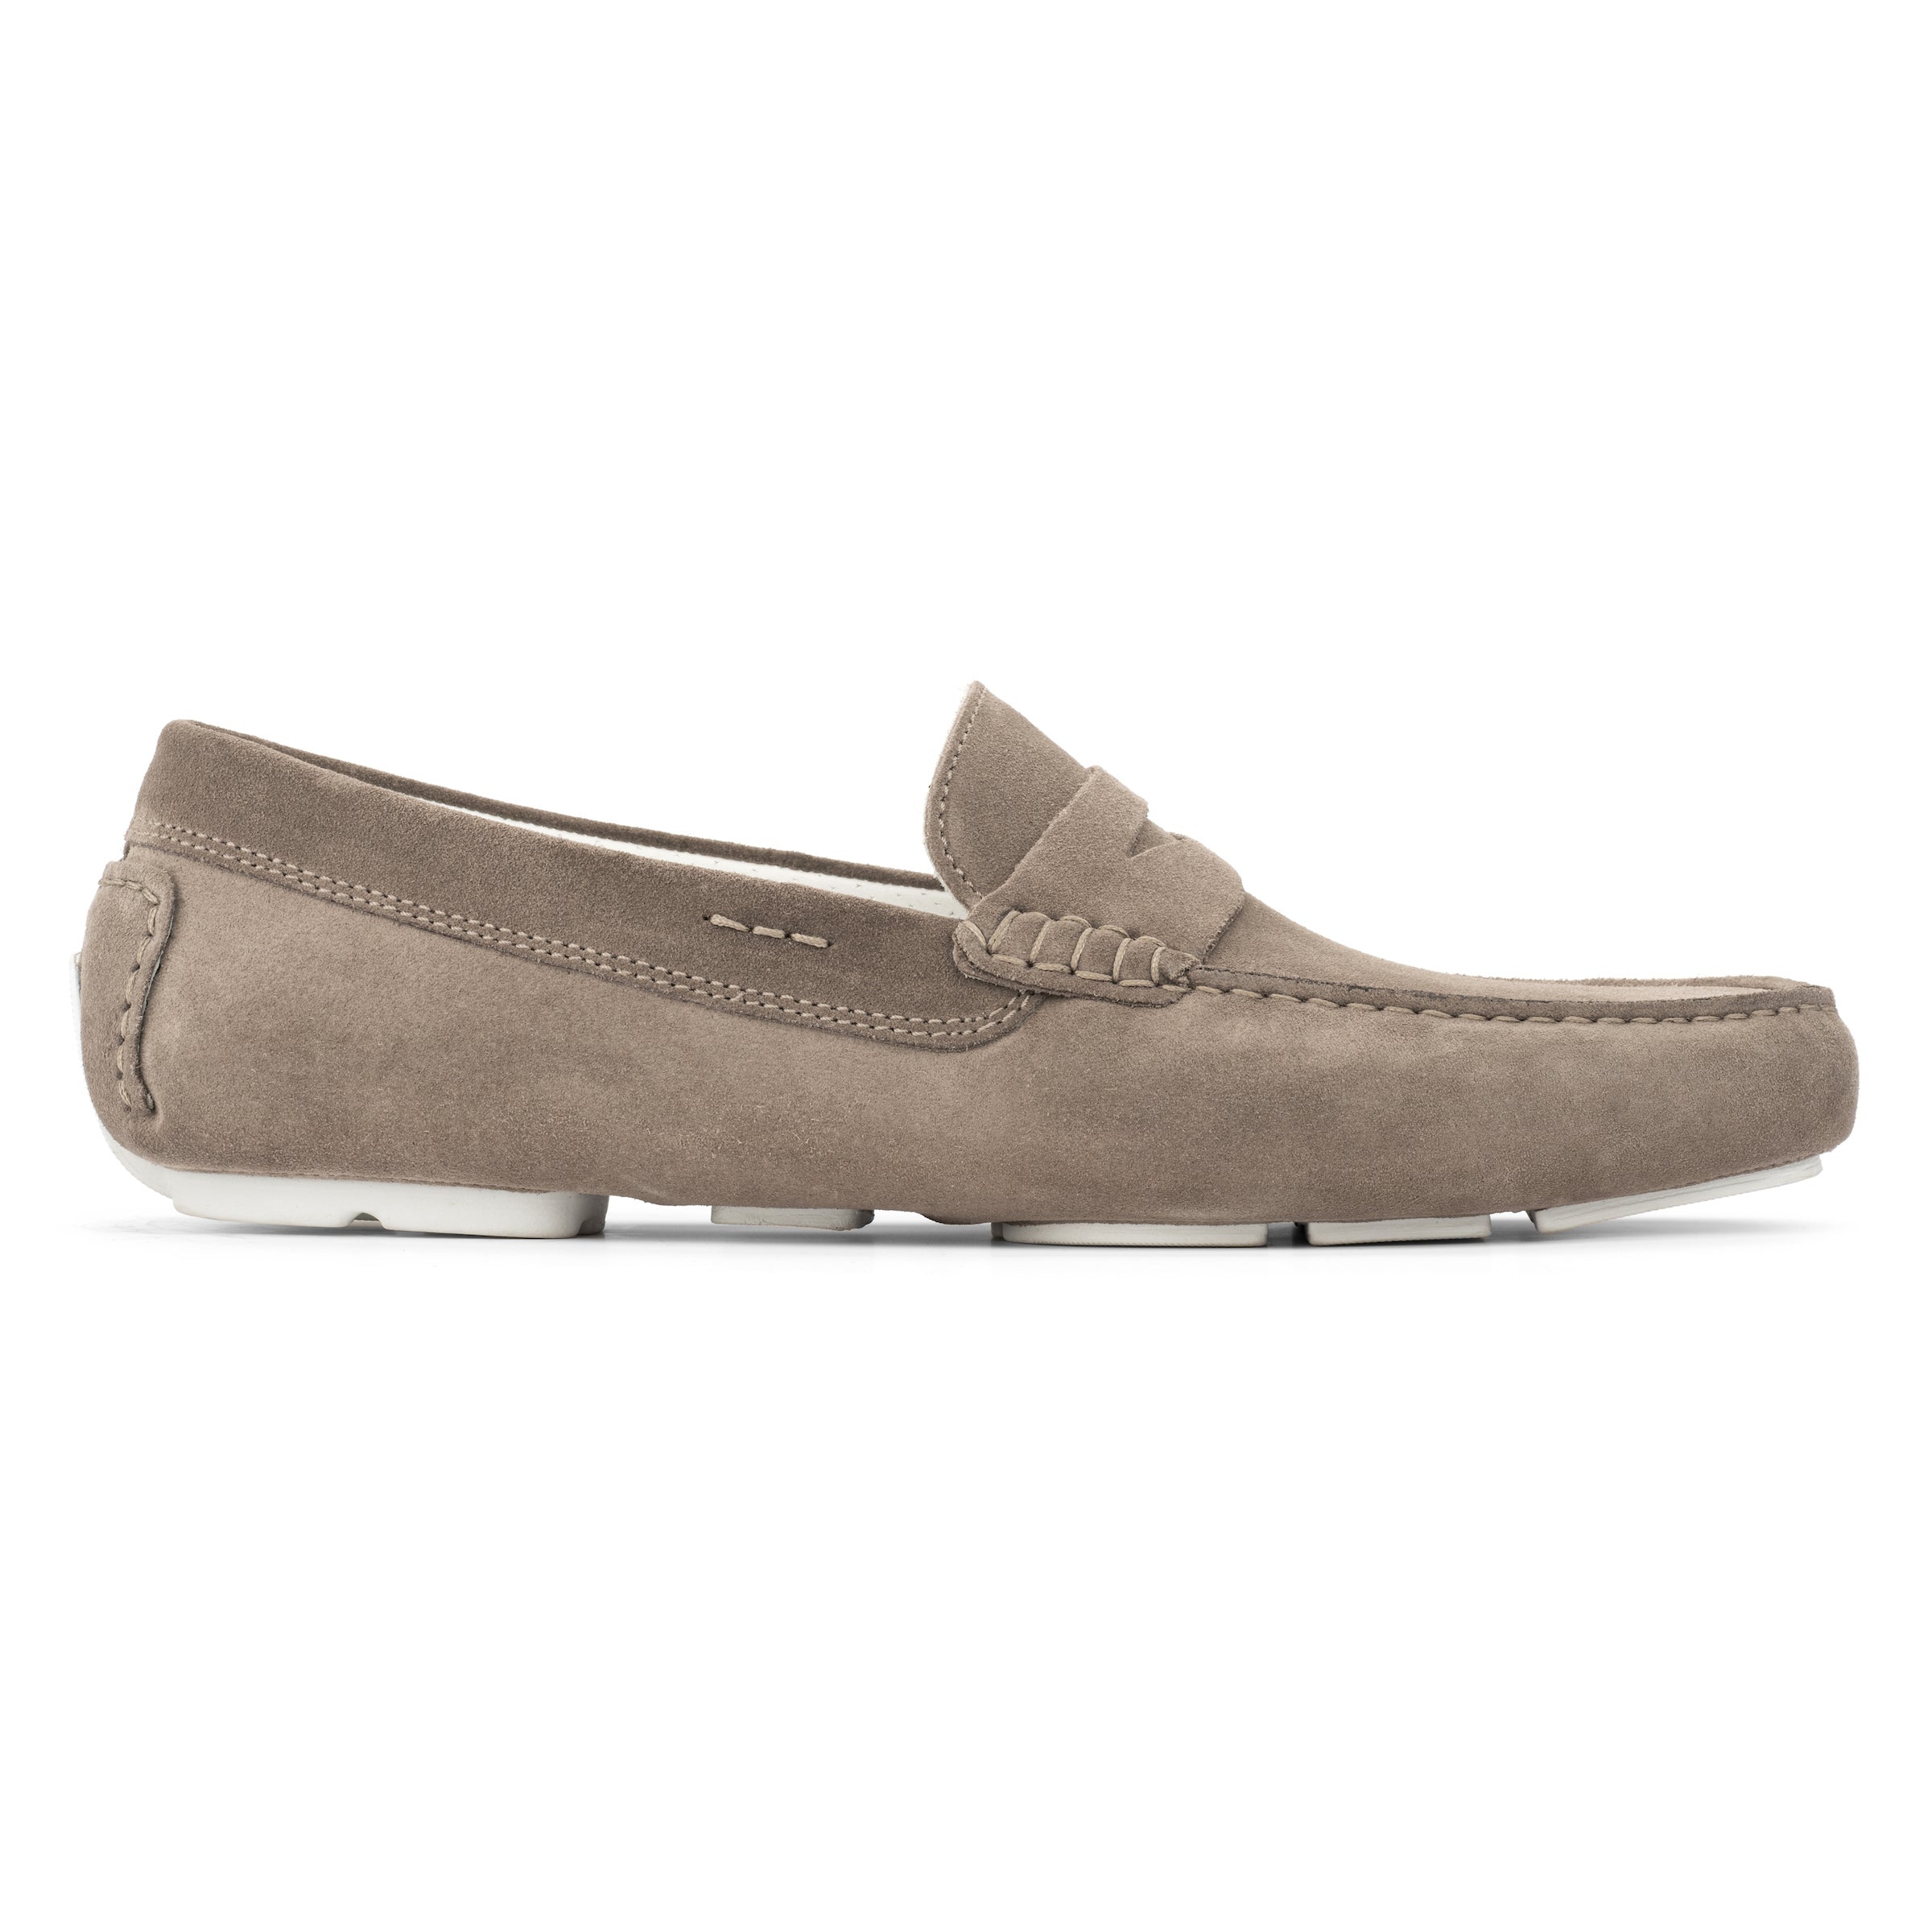 Idris Taupe Suede Driving Shoe